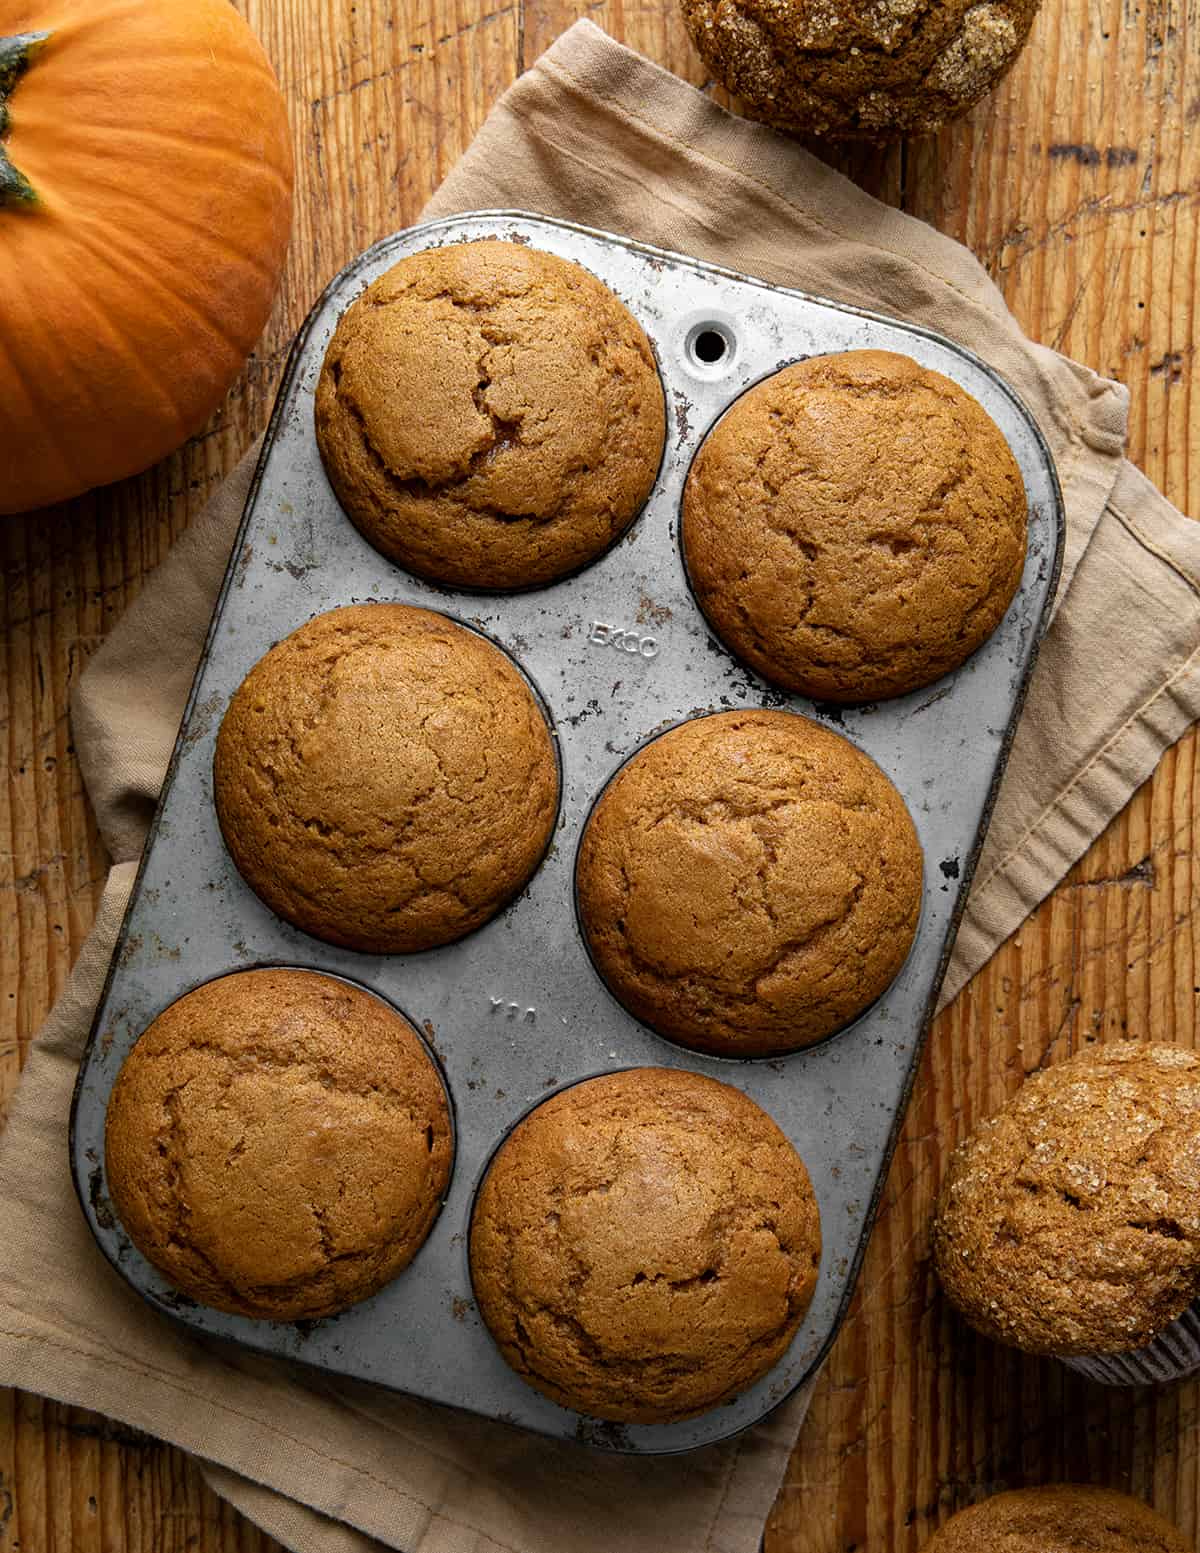 Pumpkin Spice Muffins in a Muffin Pan on a Table from Overhead.